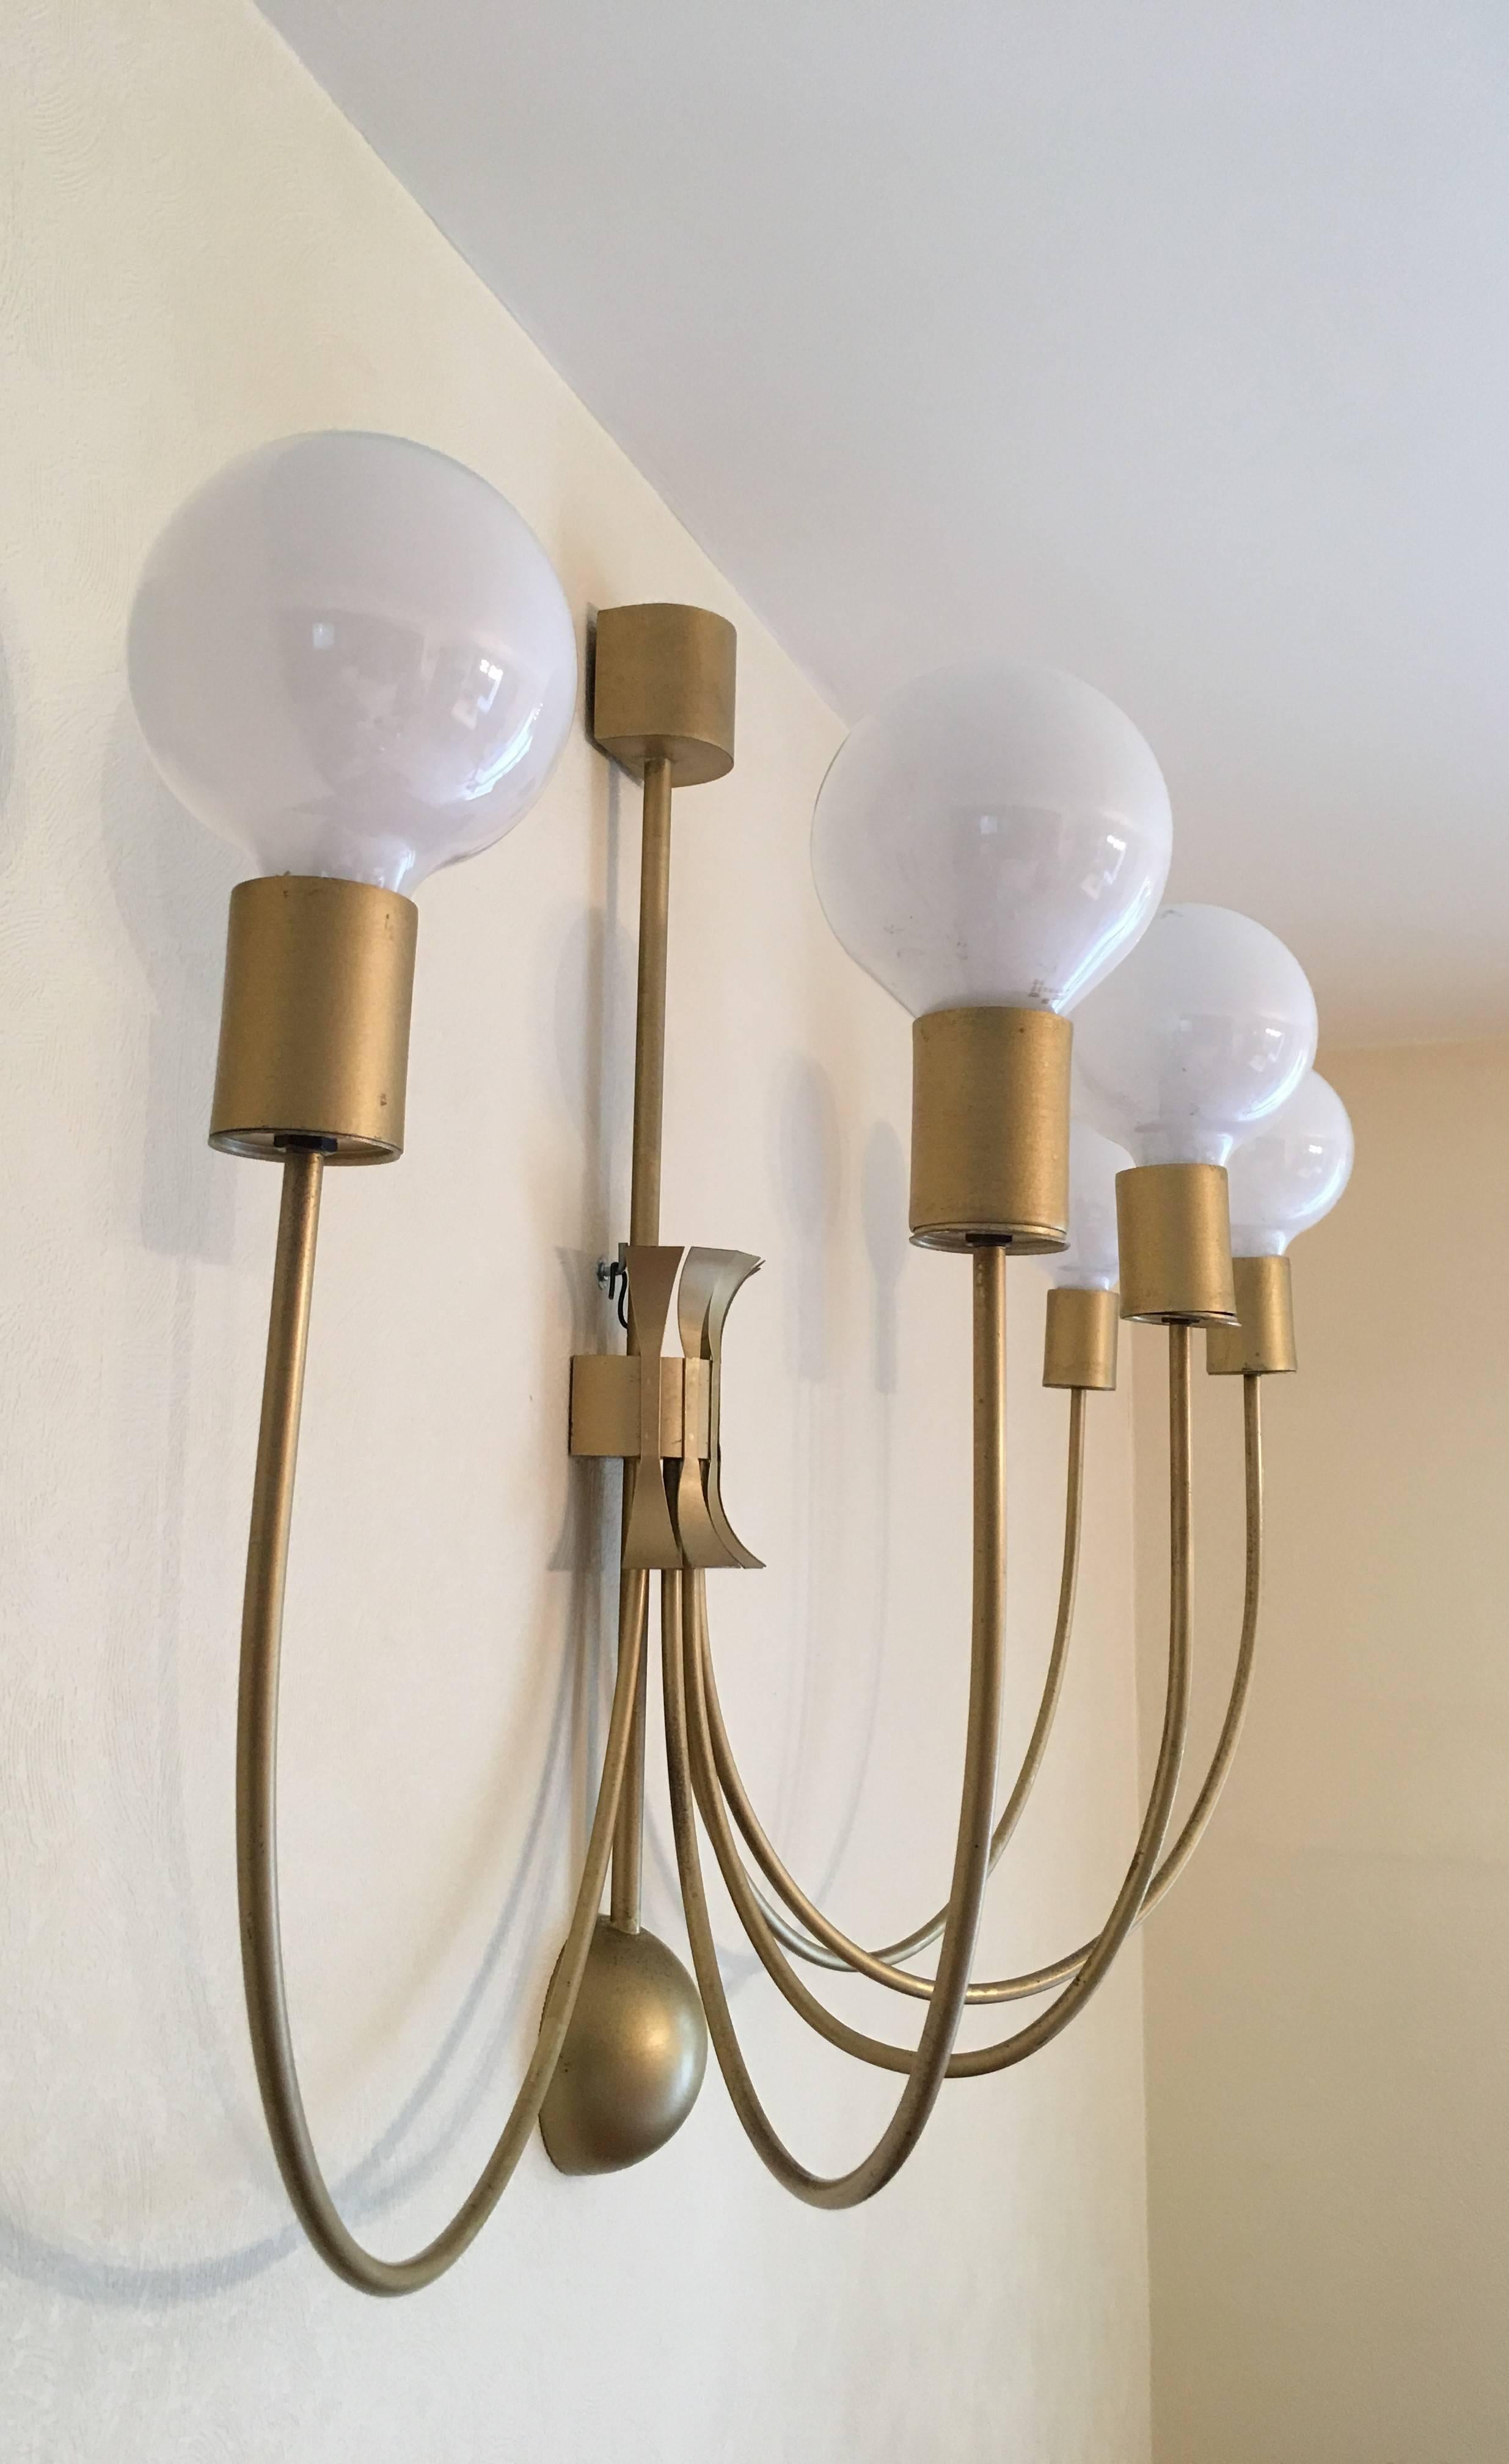 Iron Four Monumental French Theater Sconces, Five Gilt Metal Curved Arms - 1950s For Sale